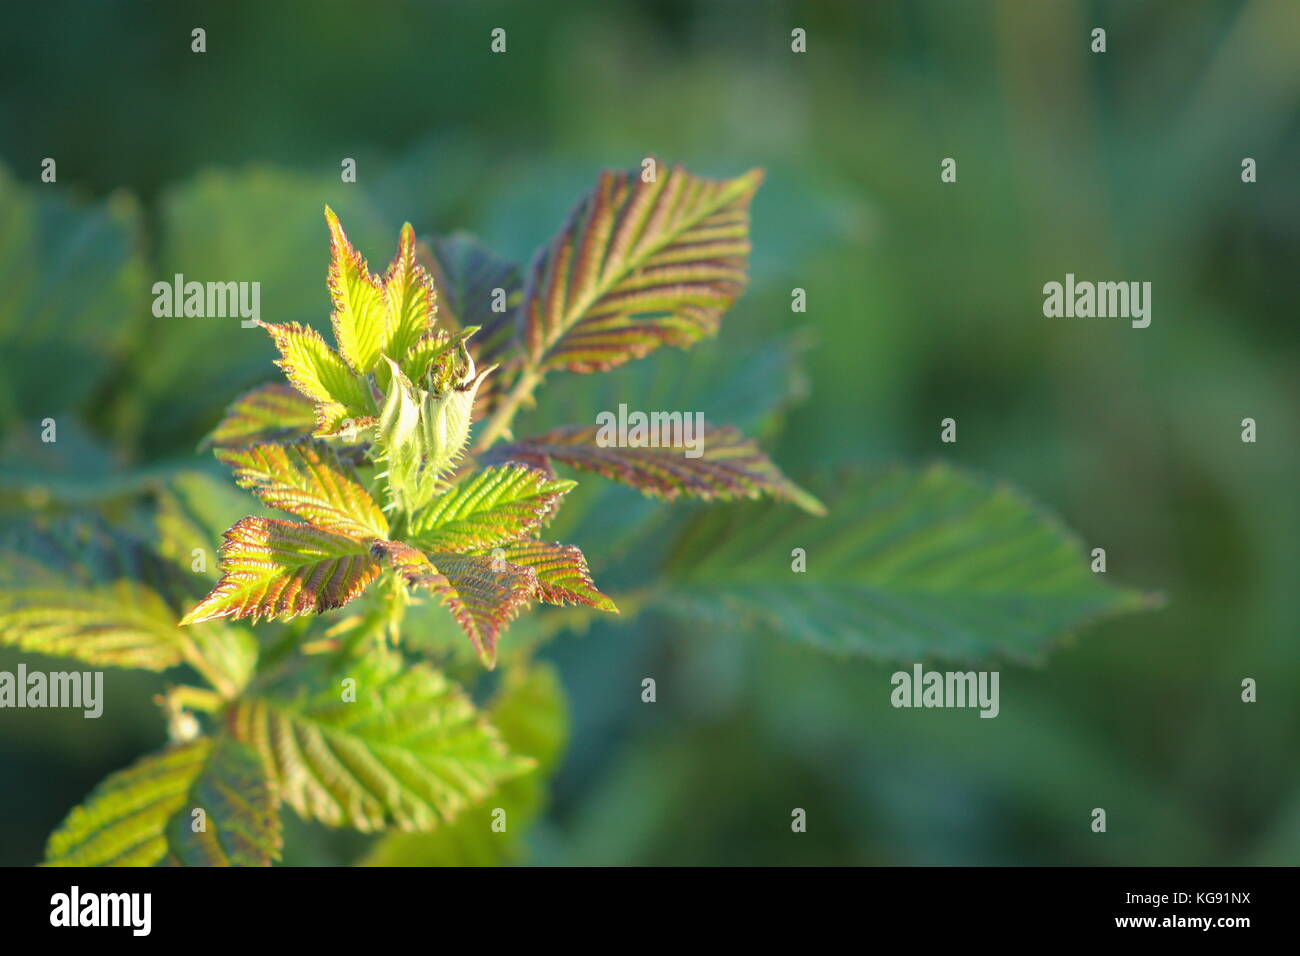 Close up image of green leaves growing and unfurling with copy space Stock Photo